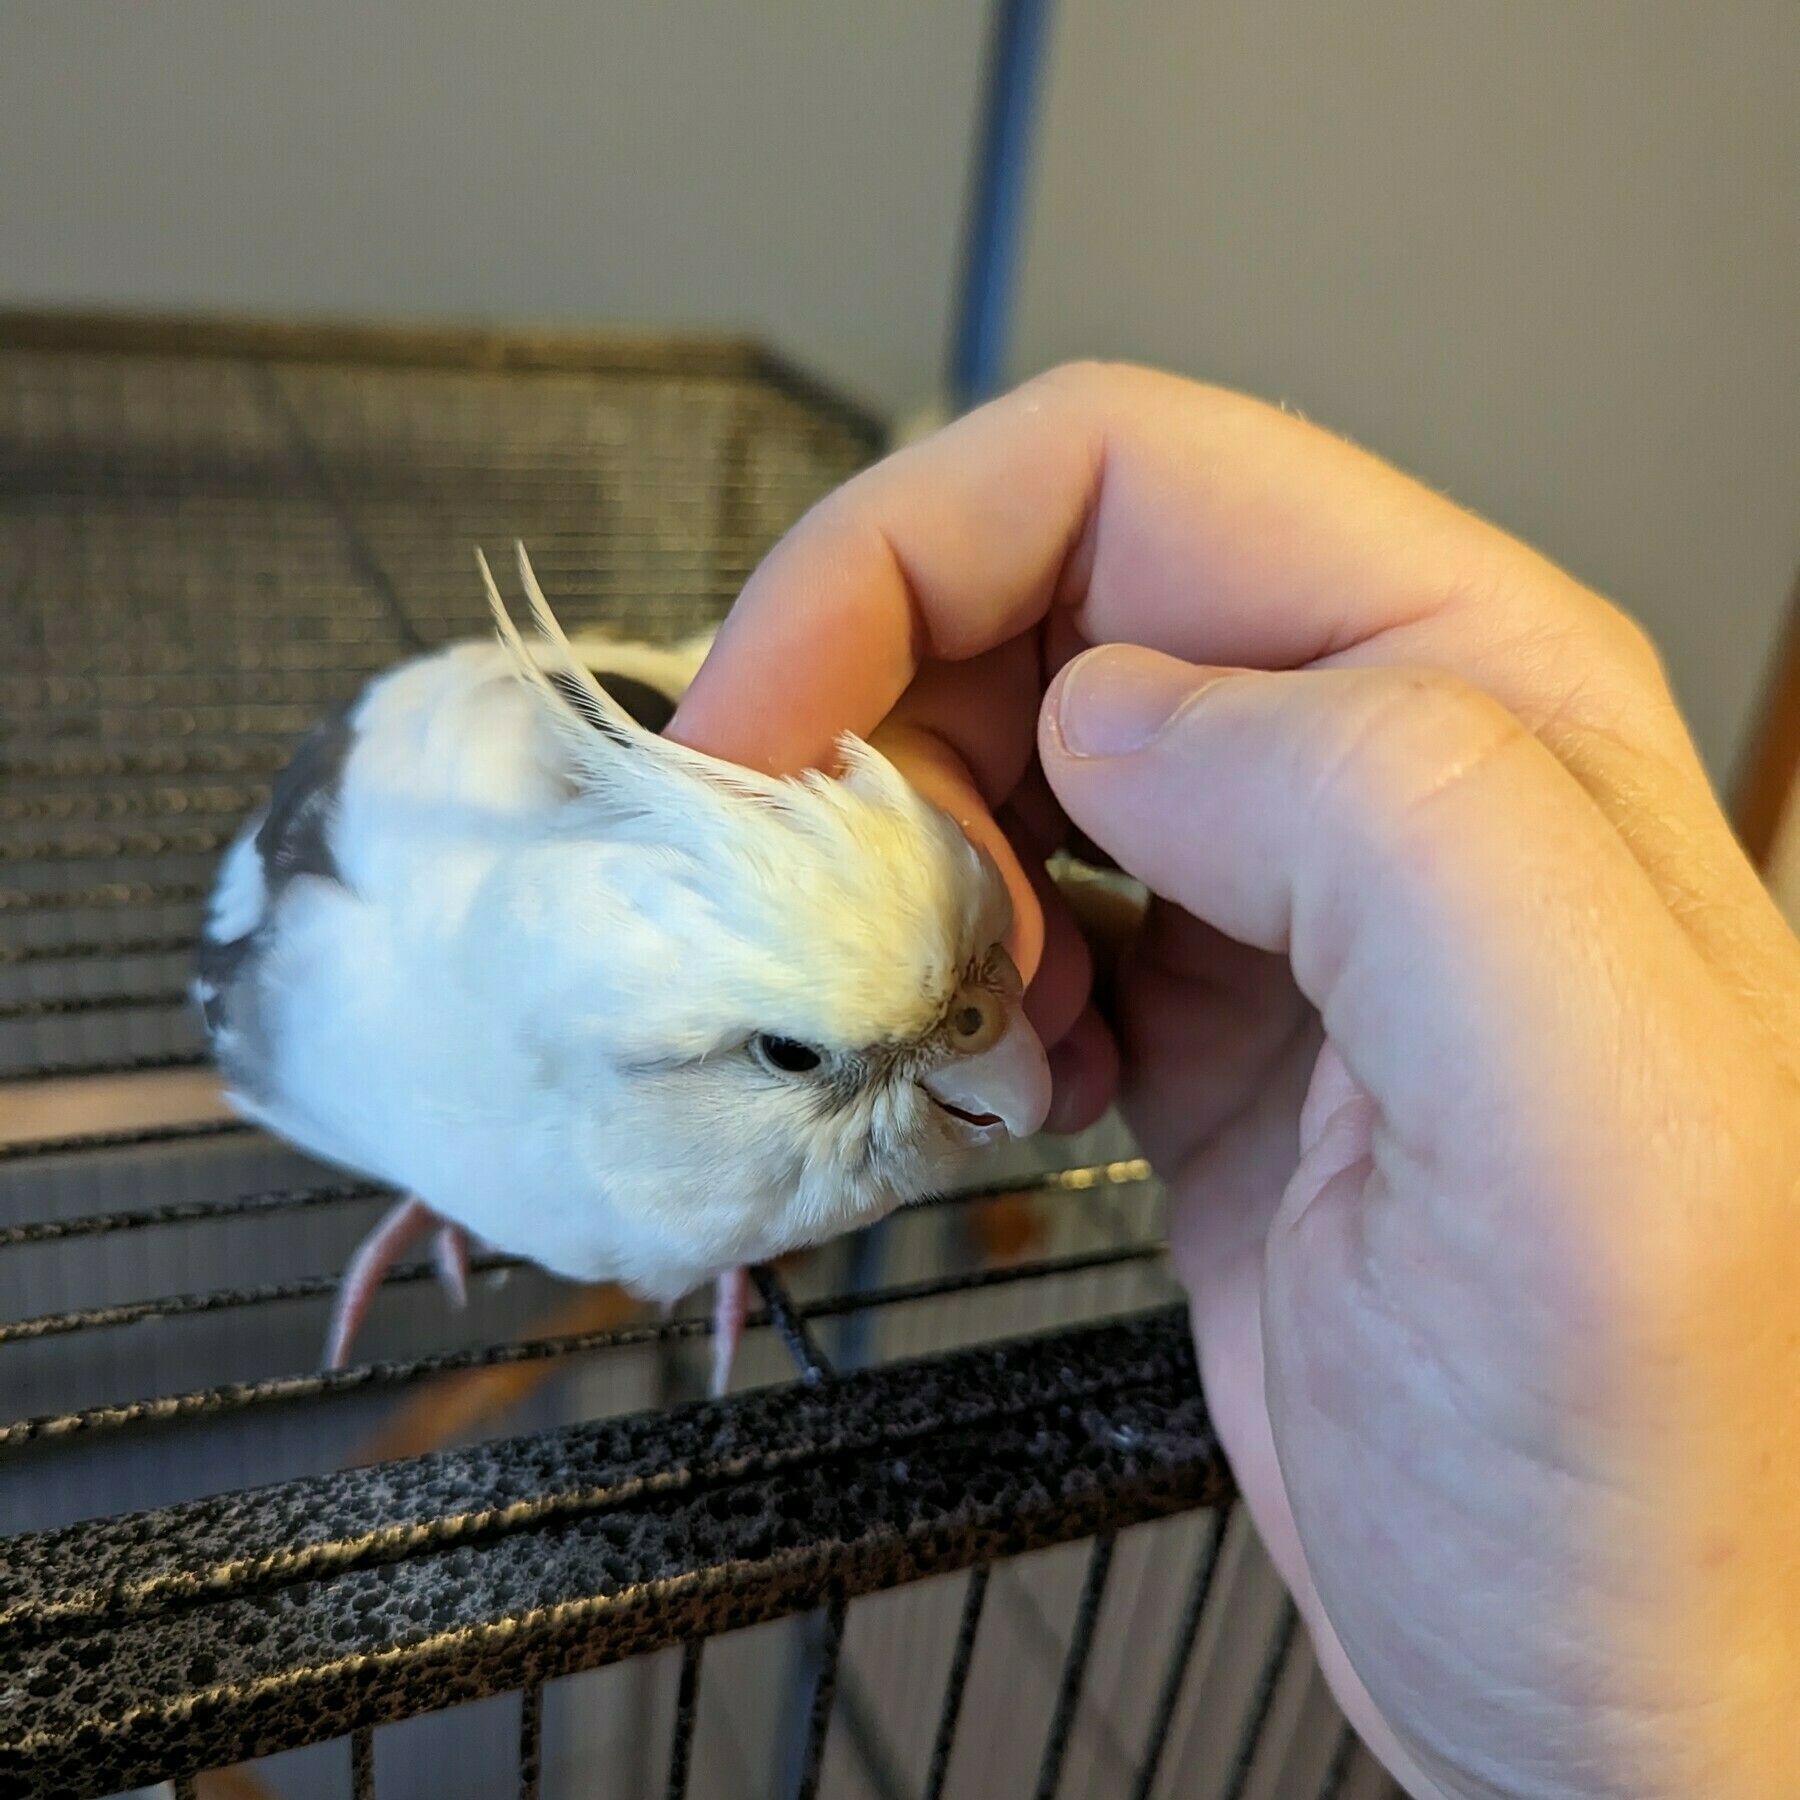 Giving a head scratch to Ivy, a white cockatiel, who's perched on a cage.